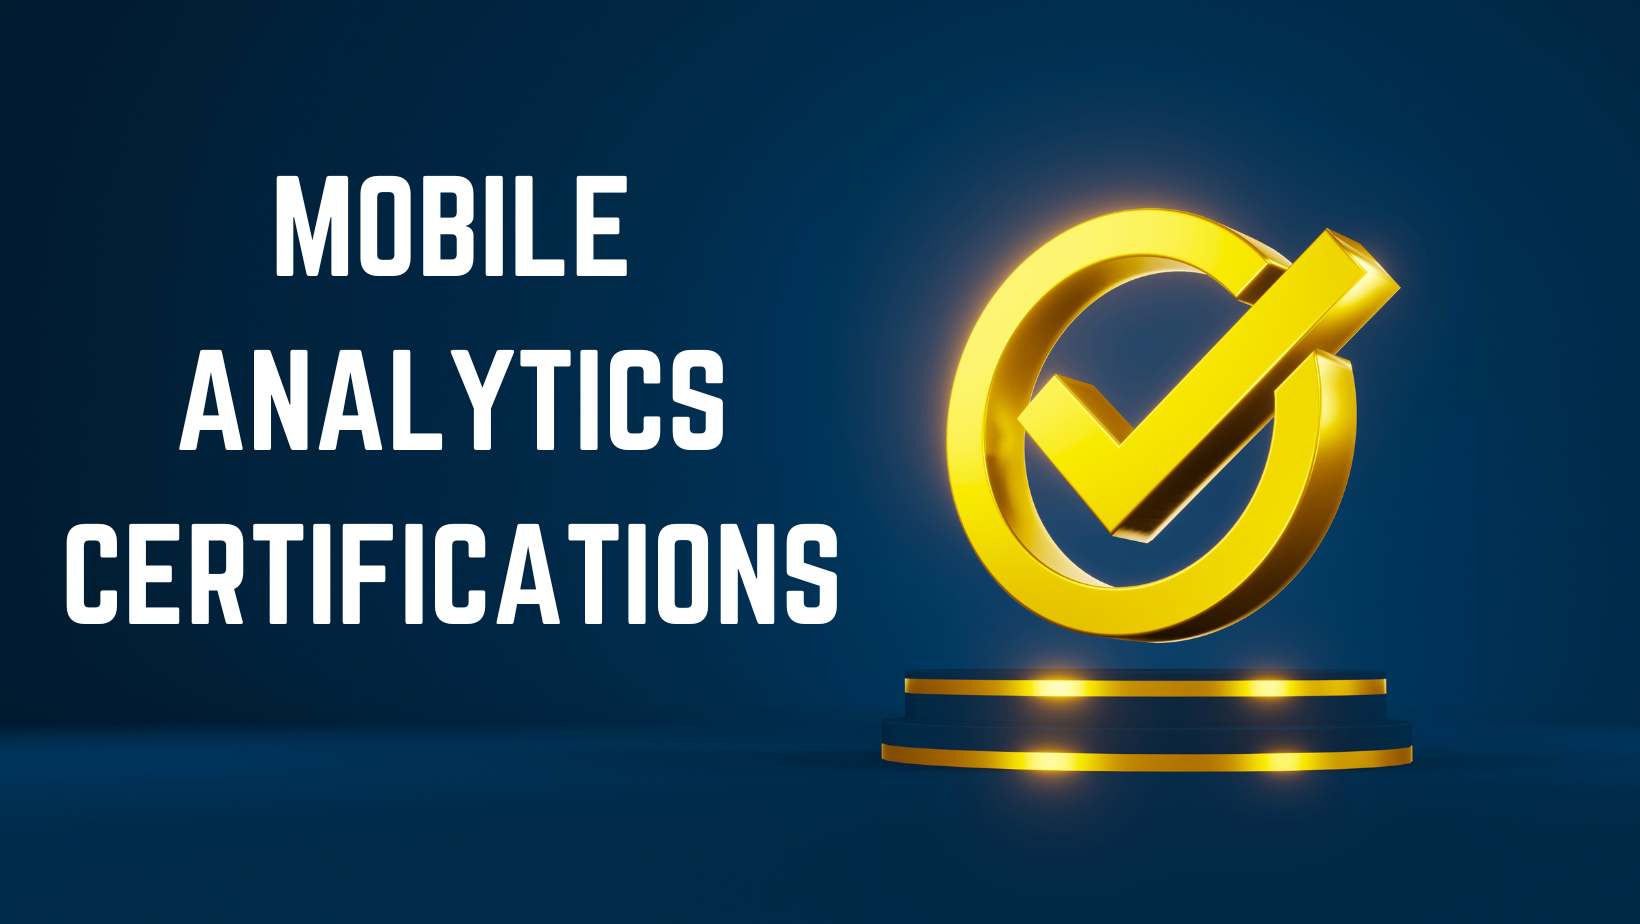 Some good mobile analytics certifications for Growth seekers